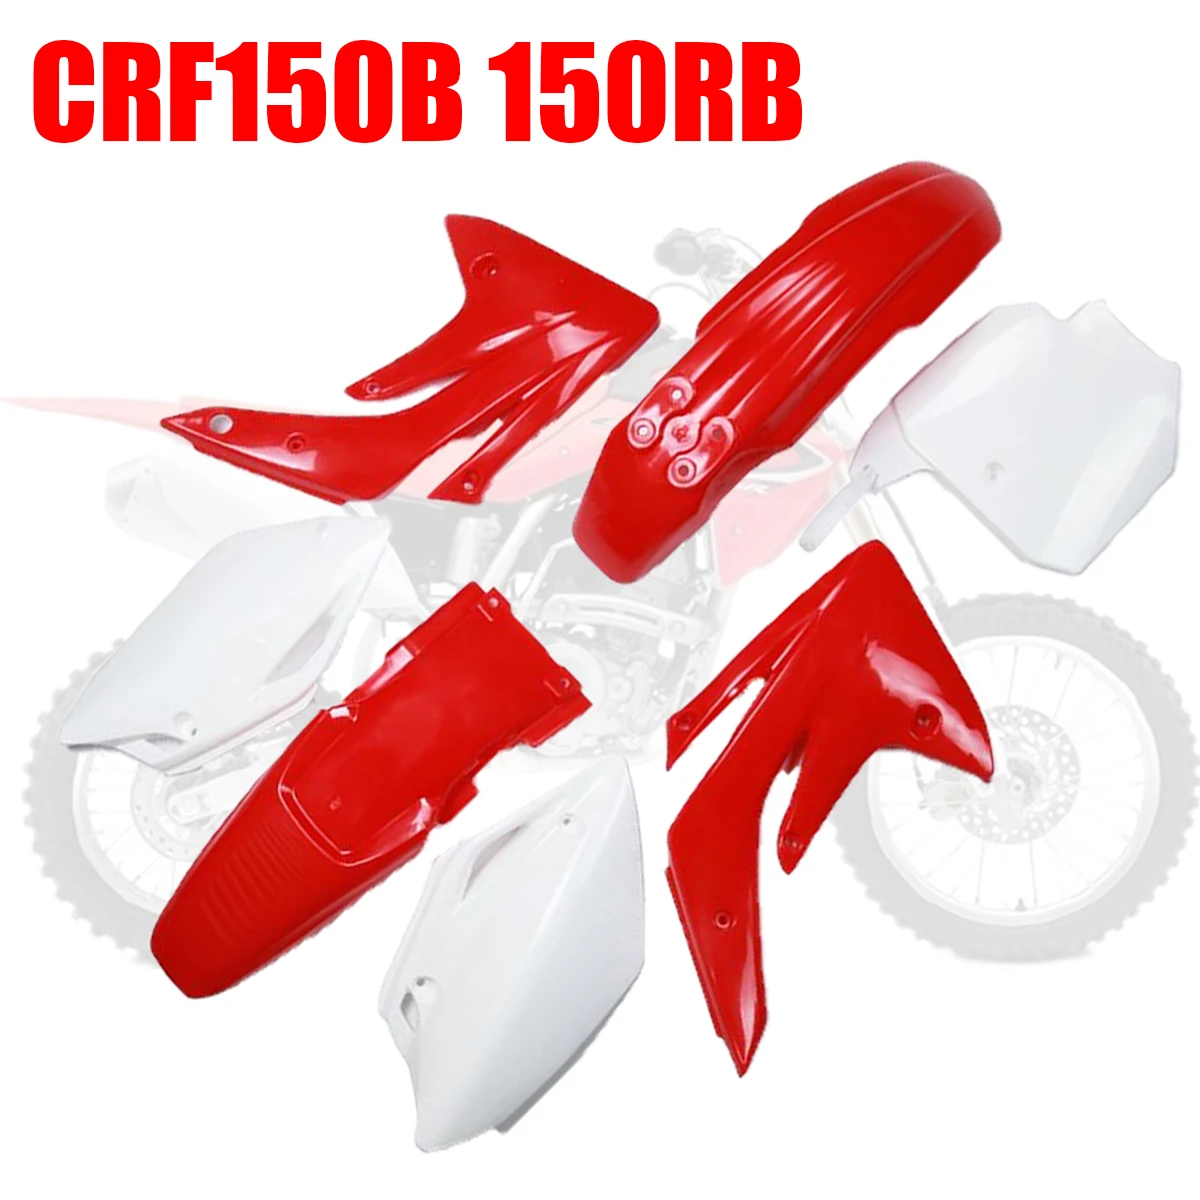 Red and White An Xin Motorcycle ABS Plastic Fender Kit Body Work Fairing Kit For Honda CRF150R 2007-2013 Dirt Pit Bike 